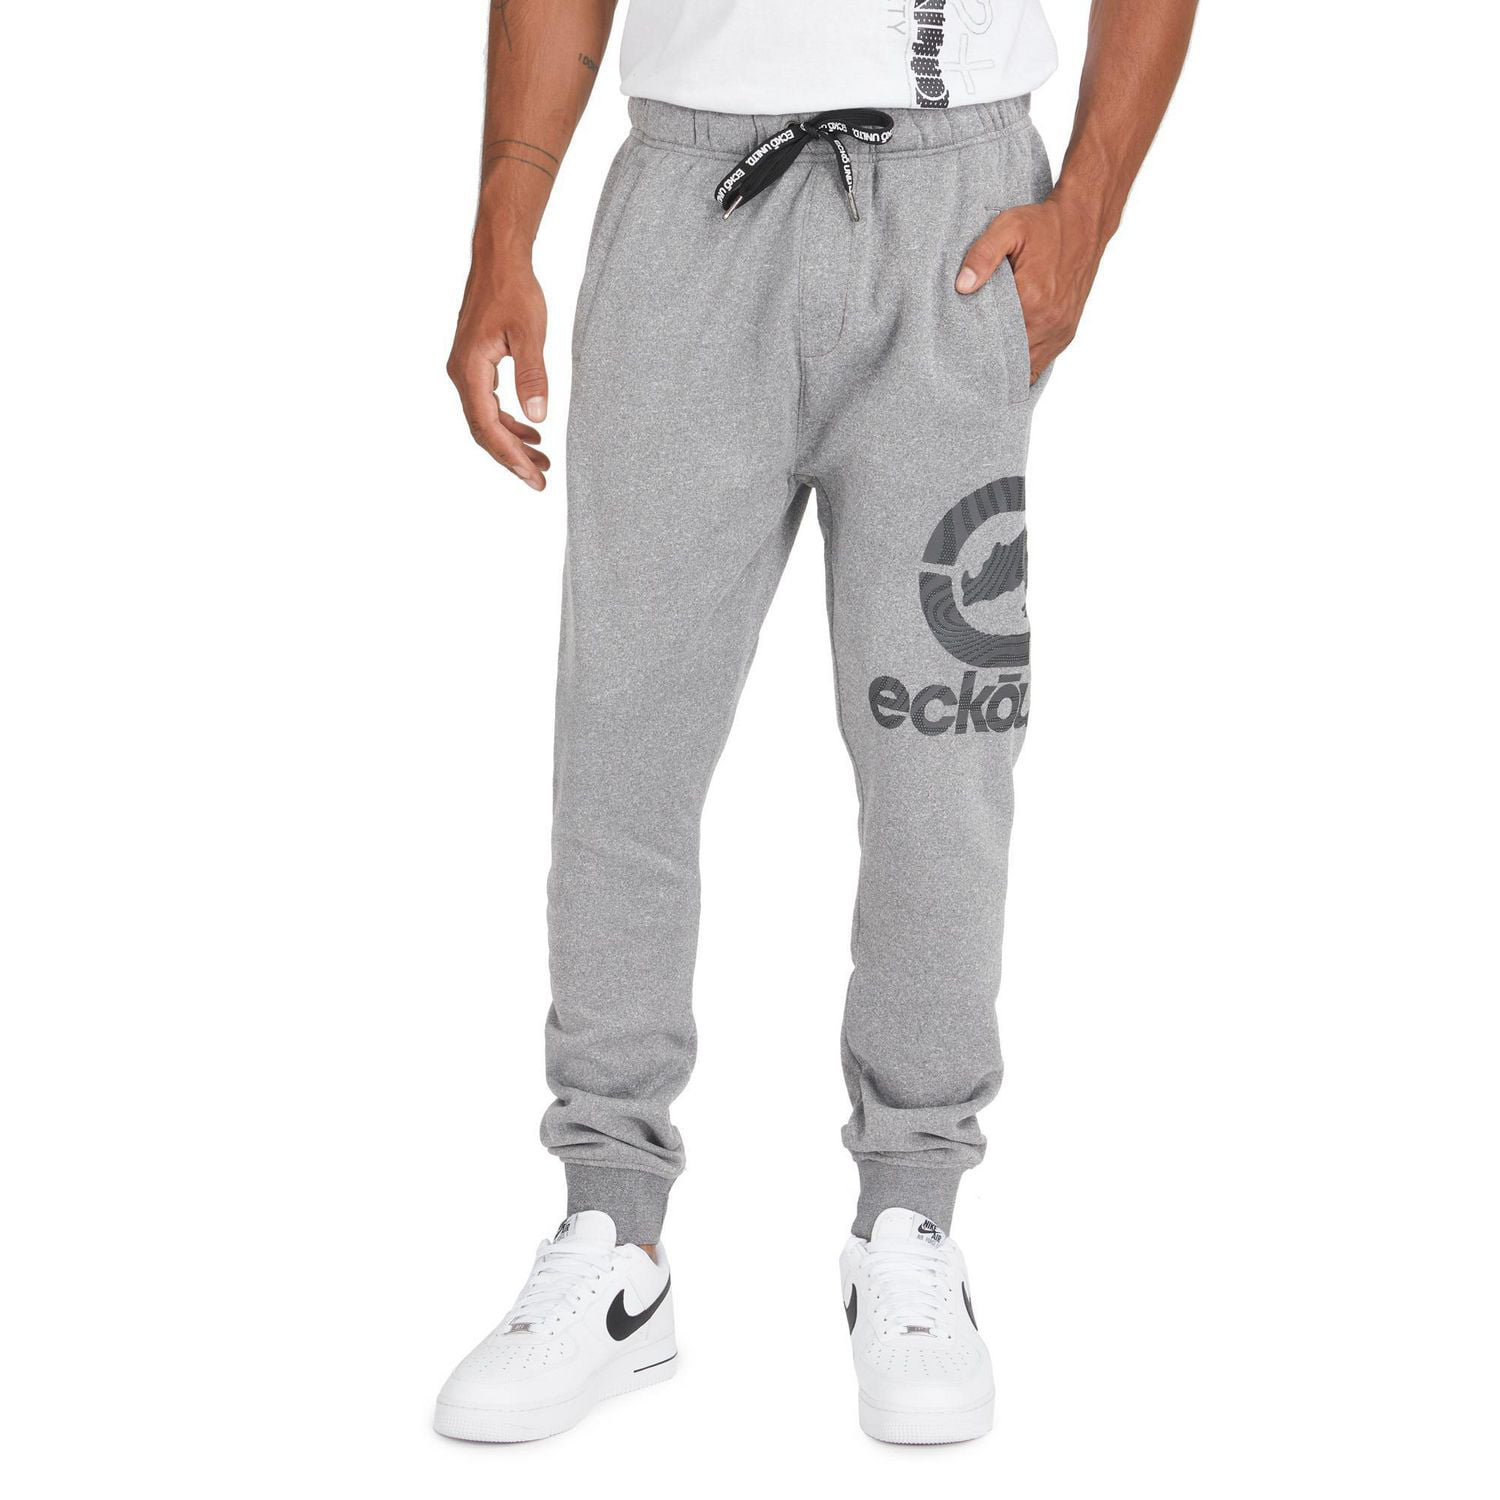 Sport-Tek Open Bottom Sweatpant Style ST257 - Casual Clothing for Men,  Women, Youth, and Children